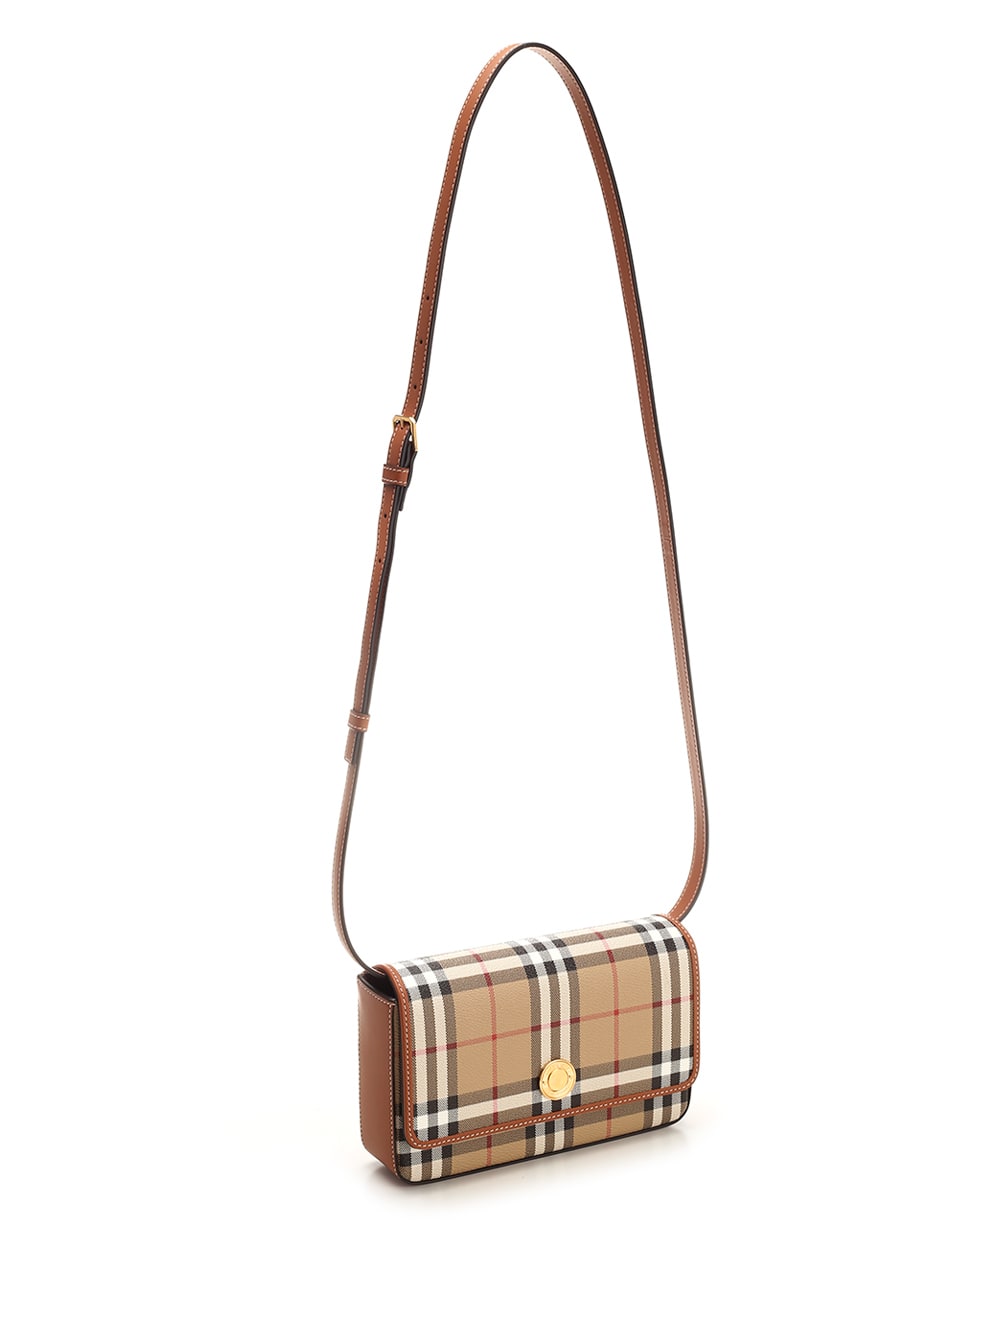 Burberry Vintage Check Canvas Cross-body Bag In Beige Multi